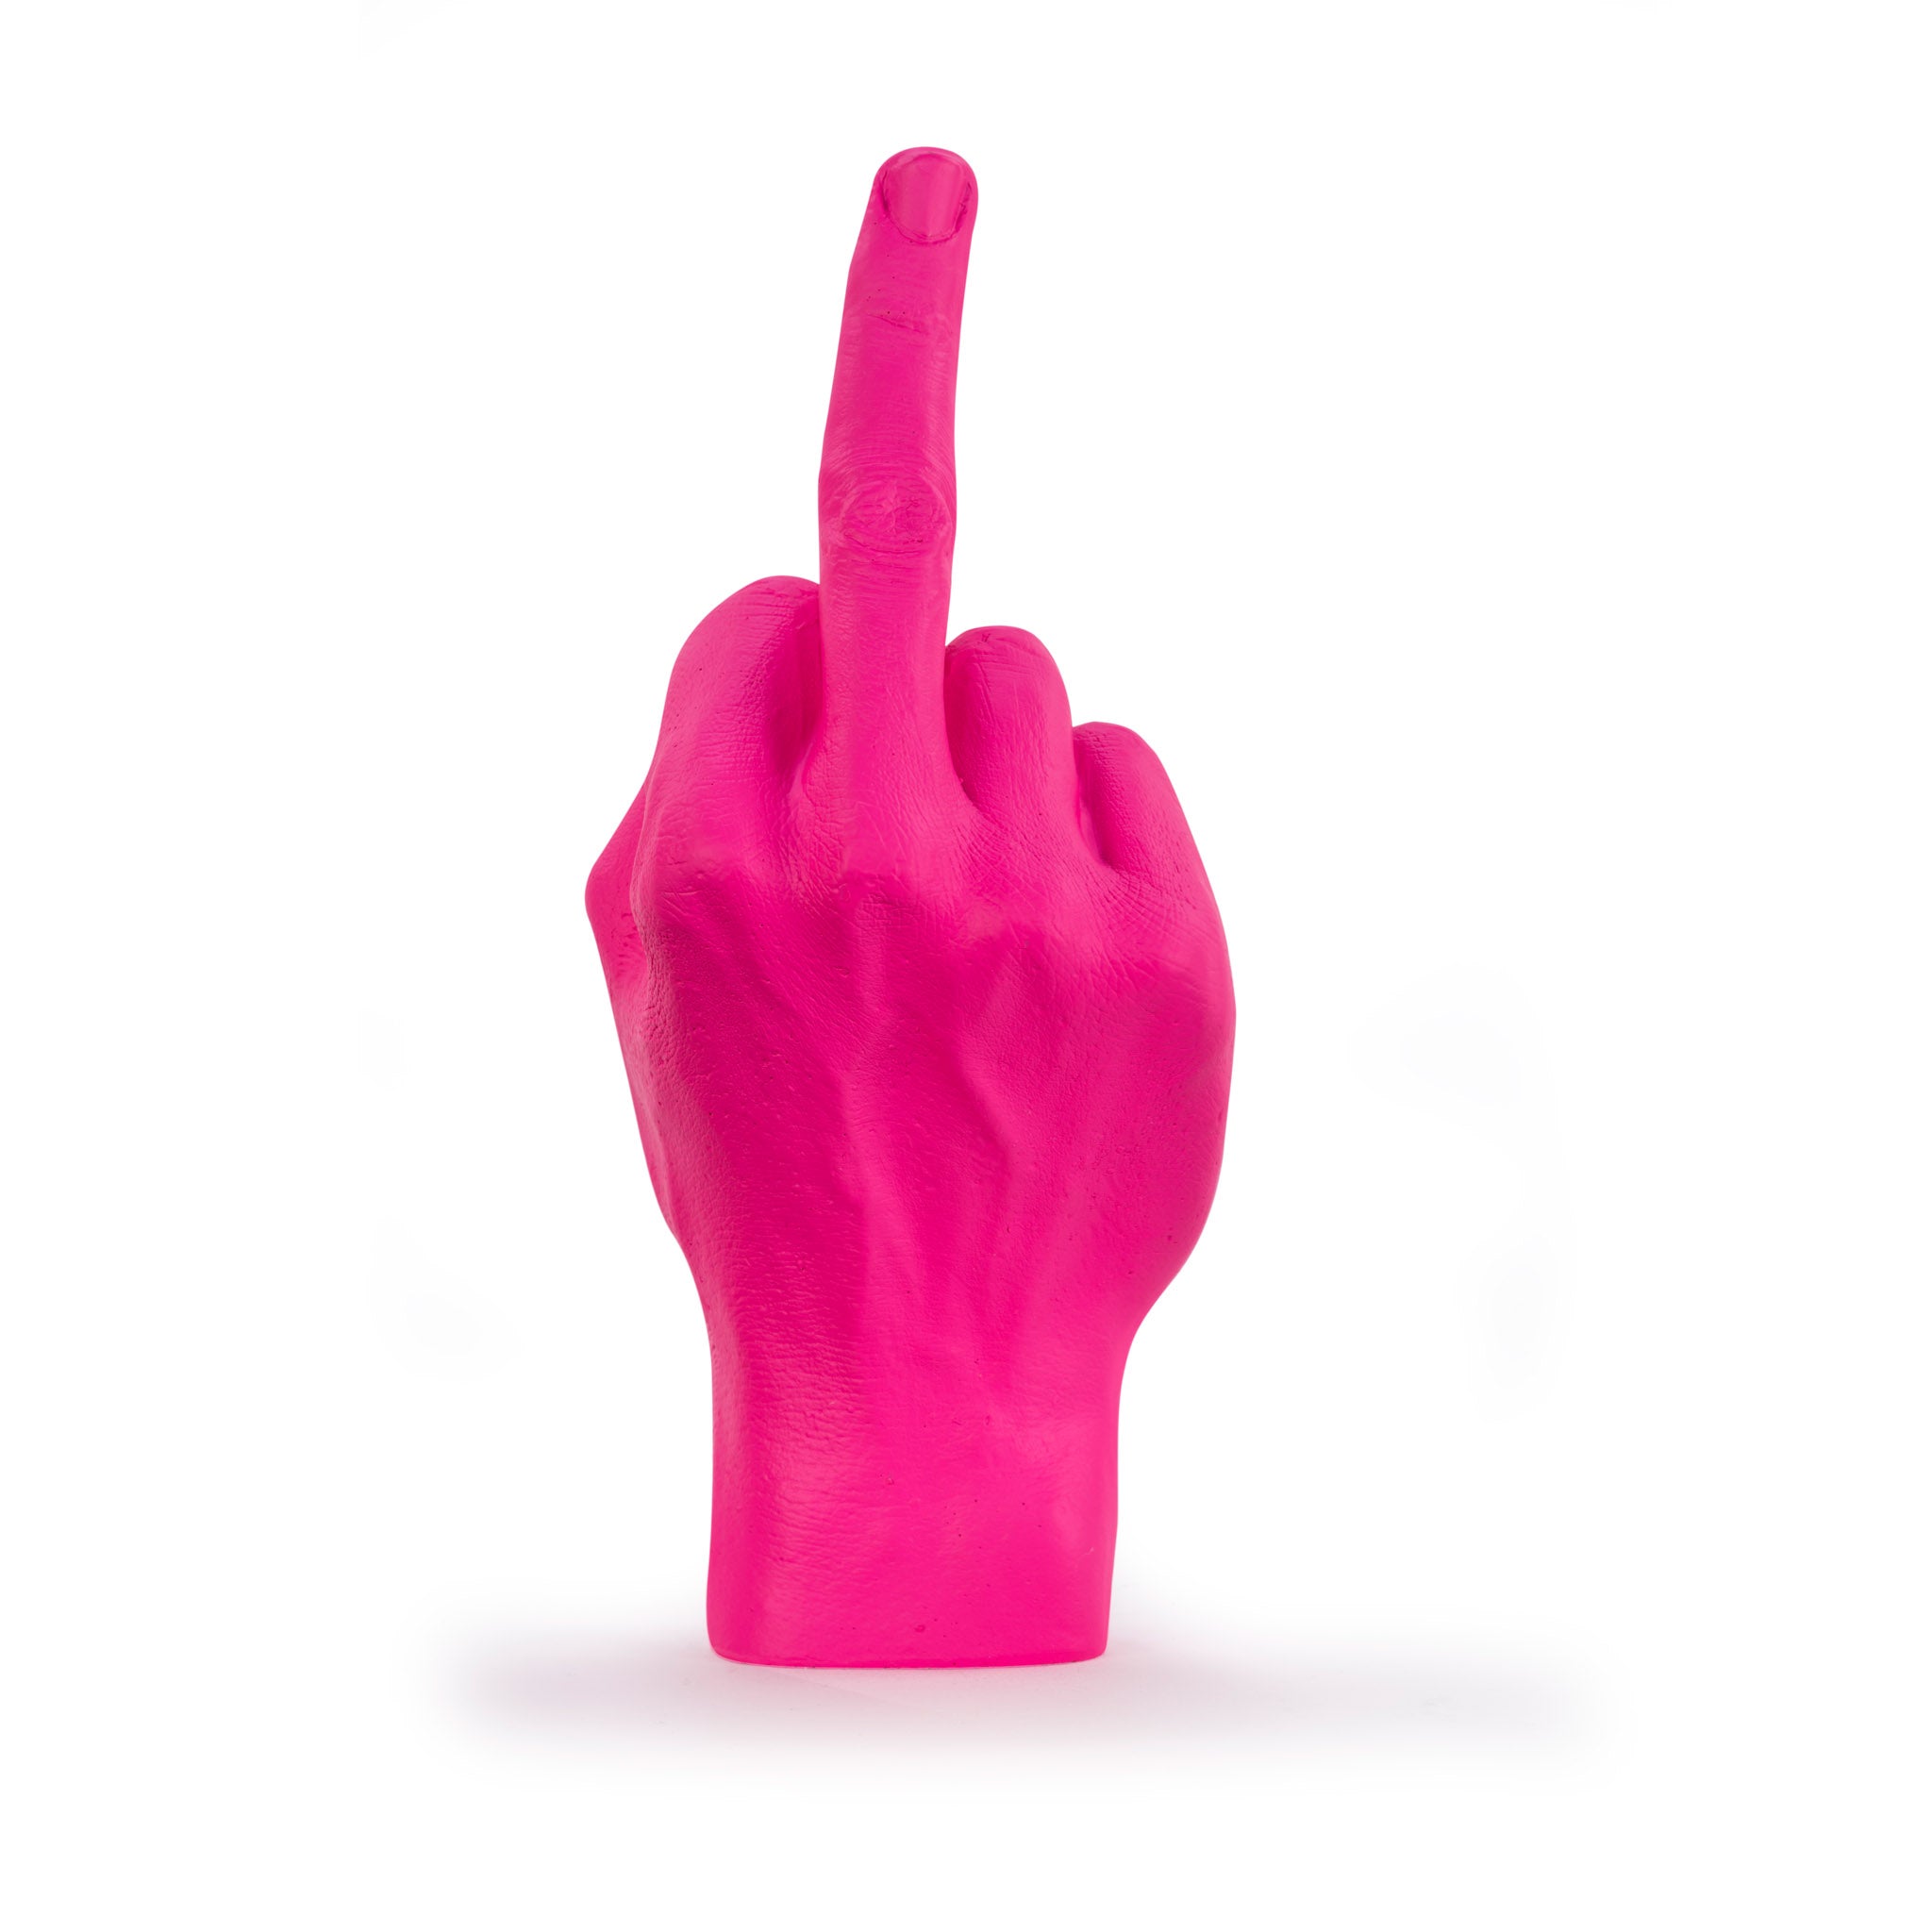 'The Finger' Hand Sculpture - Five And Dime